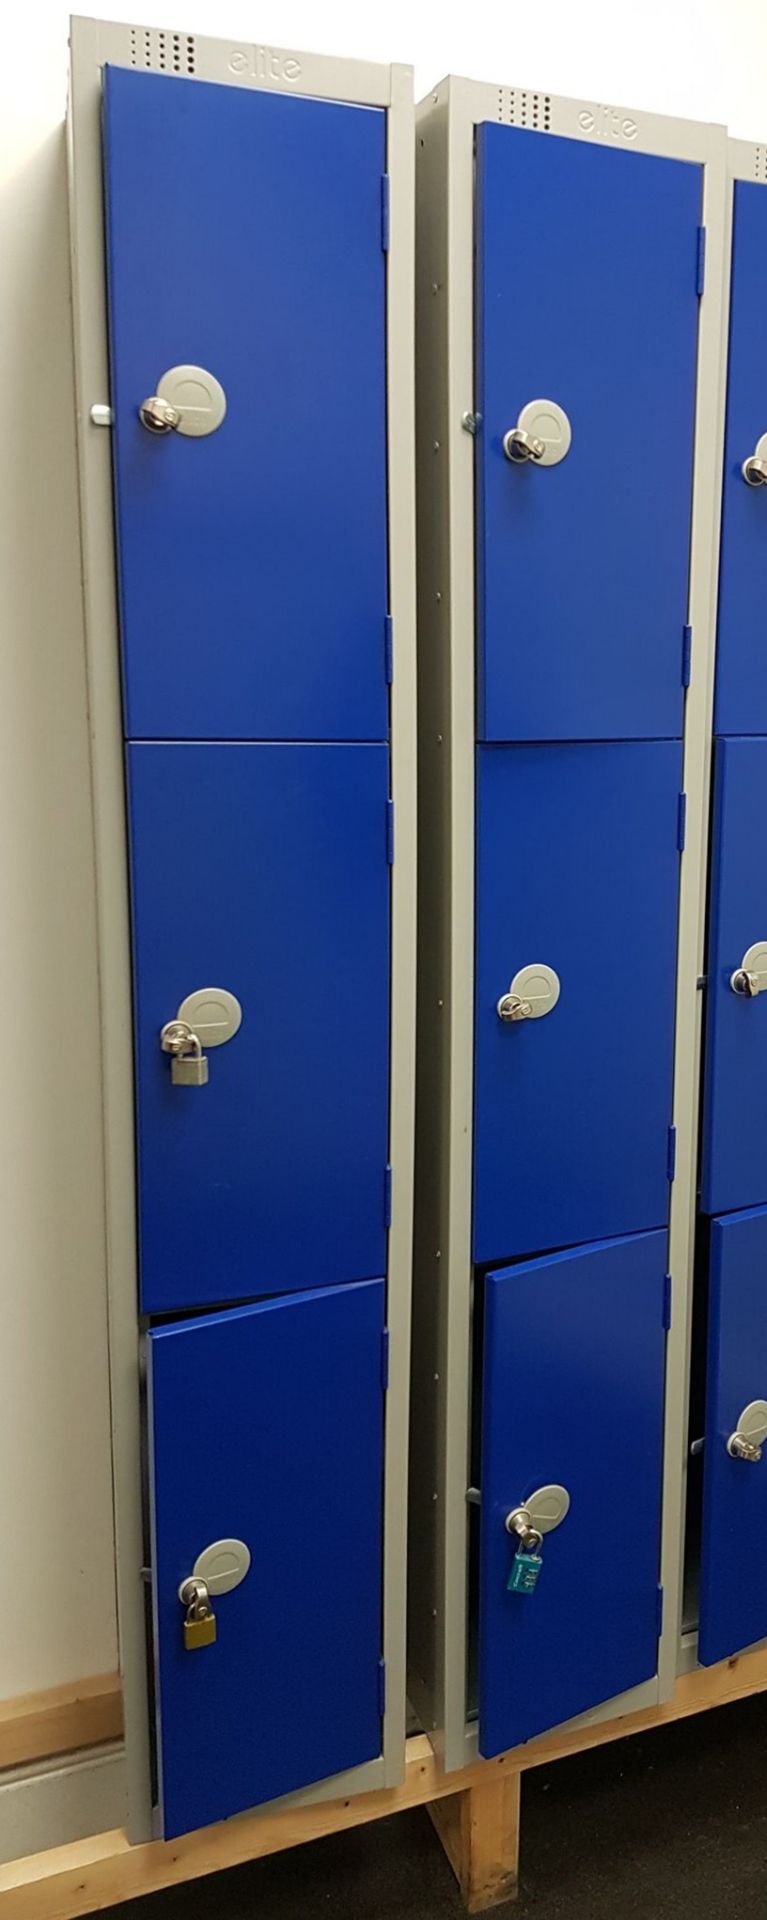 2 x Elite 3 Door Staff Clothes Lockers - Features Padlock Fittings, Welded and Riveted Steel - Image 2 of 5